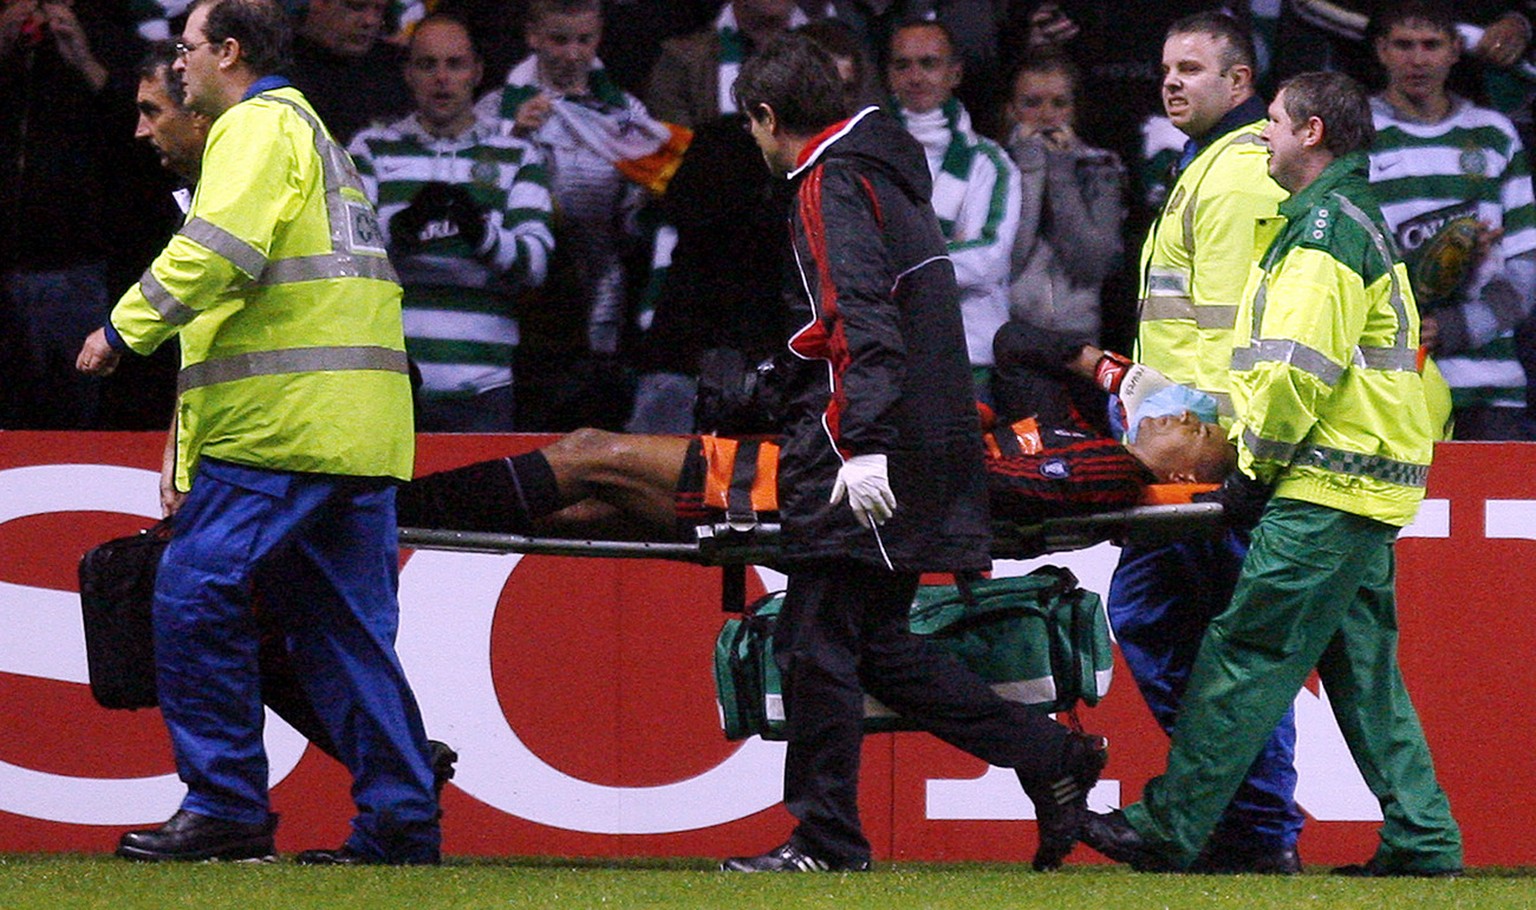 AC Milan&#039;s goalkeeper Dida is carried off after an incident with a Celtic fan during their Champions League, Group D, soccer match at Celtic Park, Glasgow, Scotland, Wednesday Oct. 3, 2007. (AP P ...